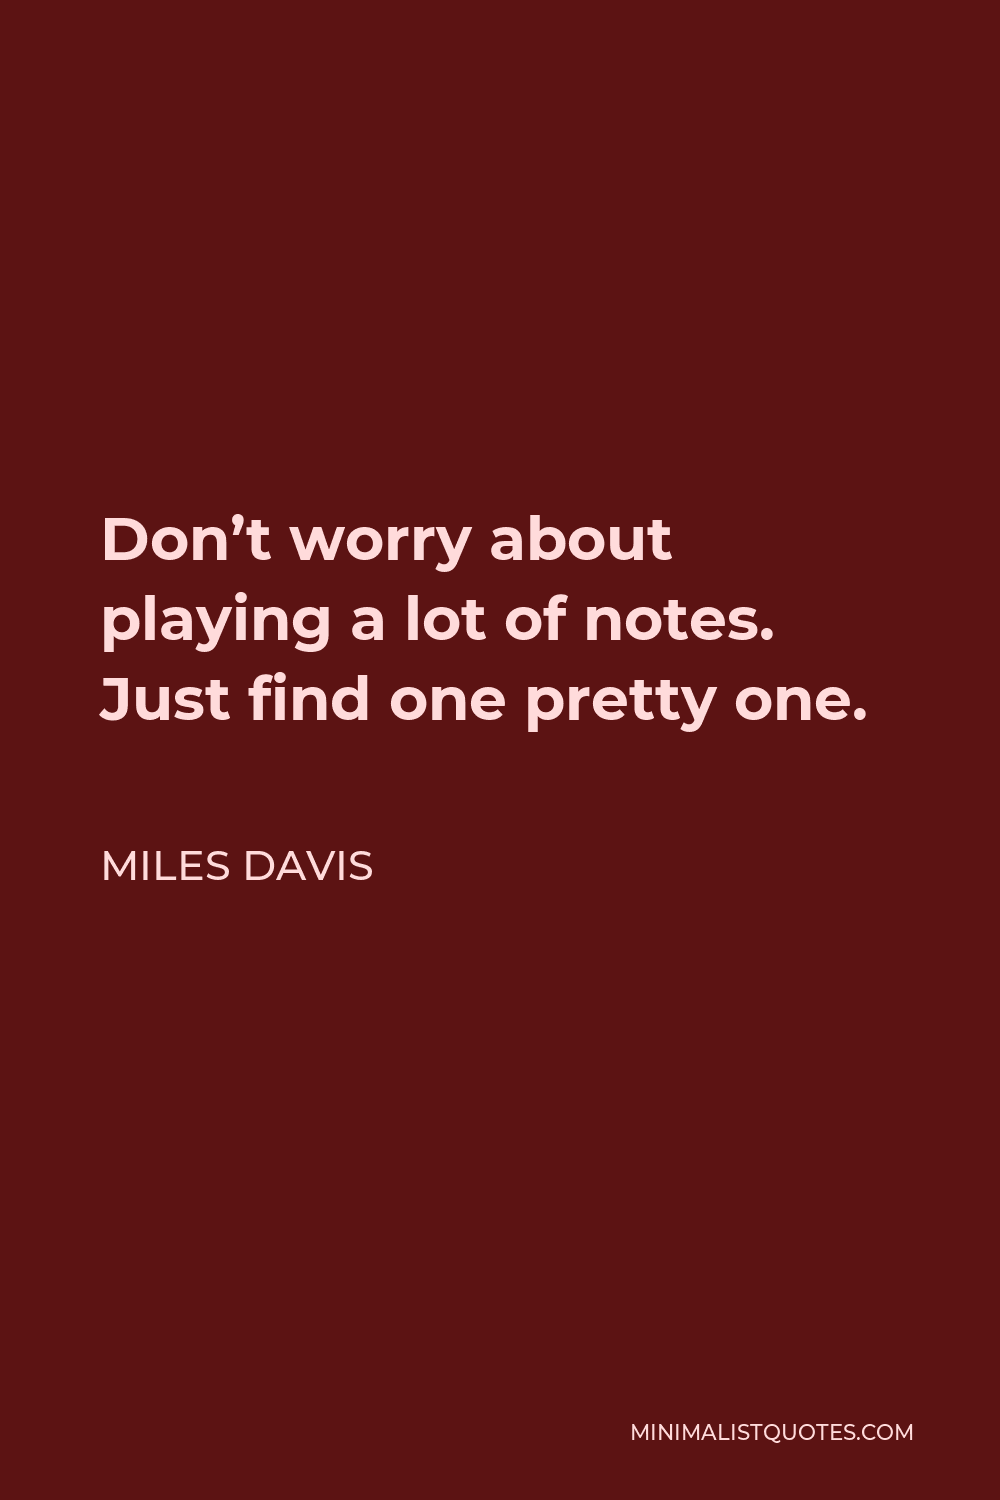 Miles Davis Quote - Don’t worry about playing a lot of notes. Just find one pretty one.